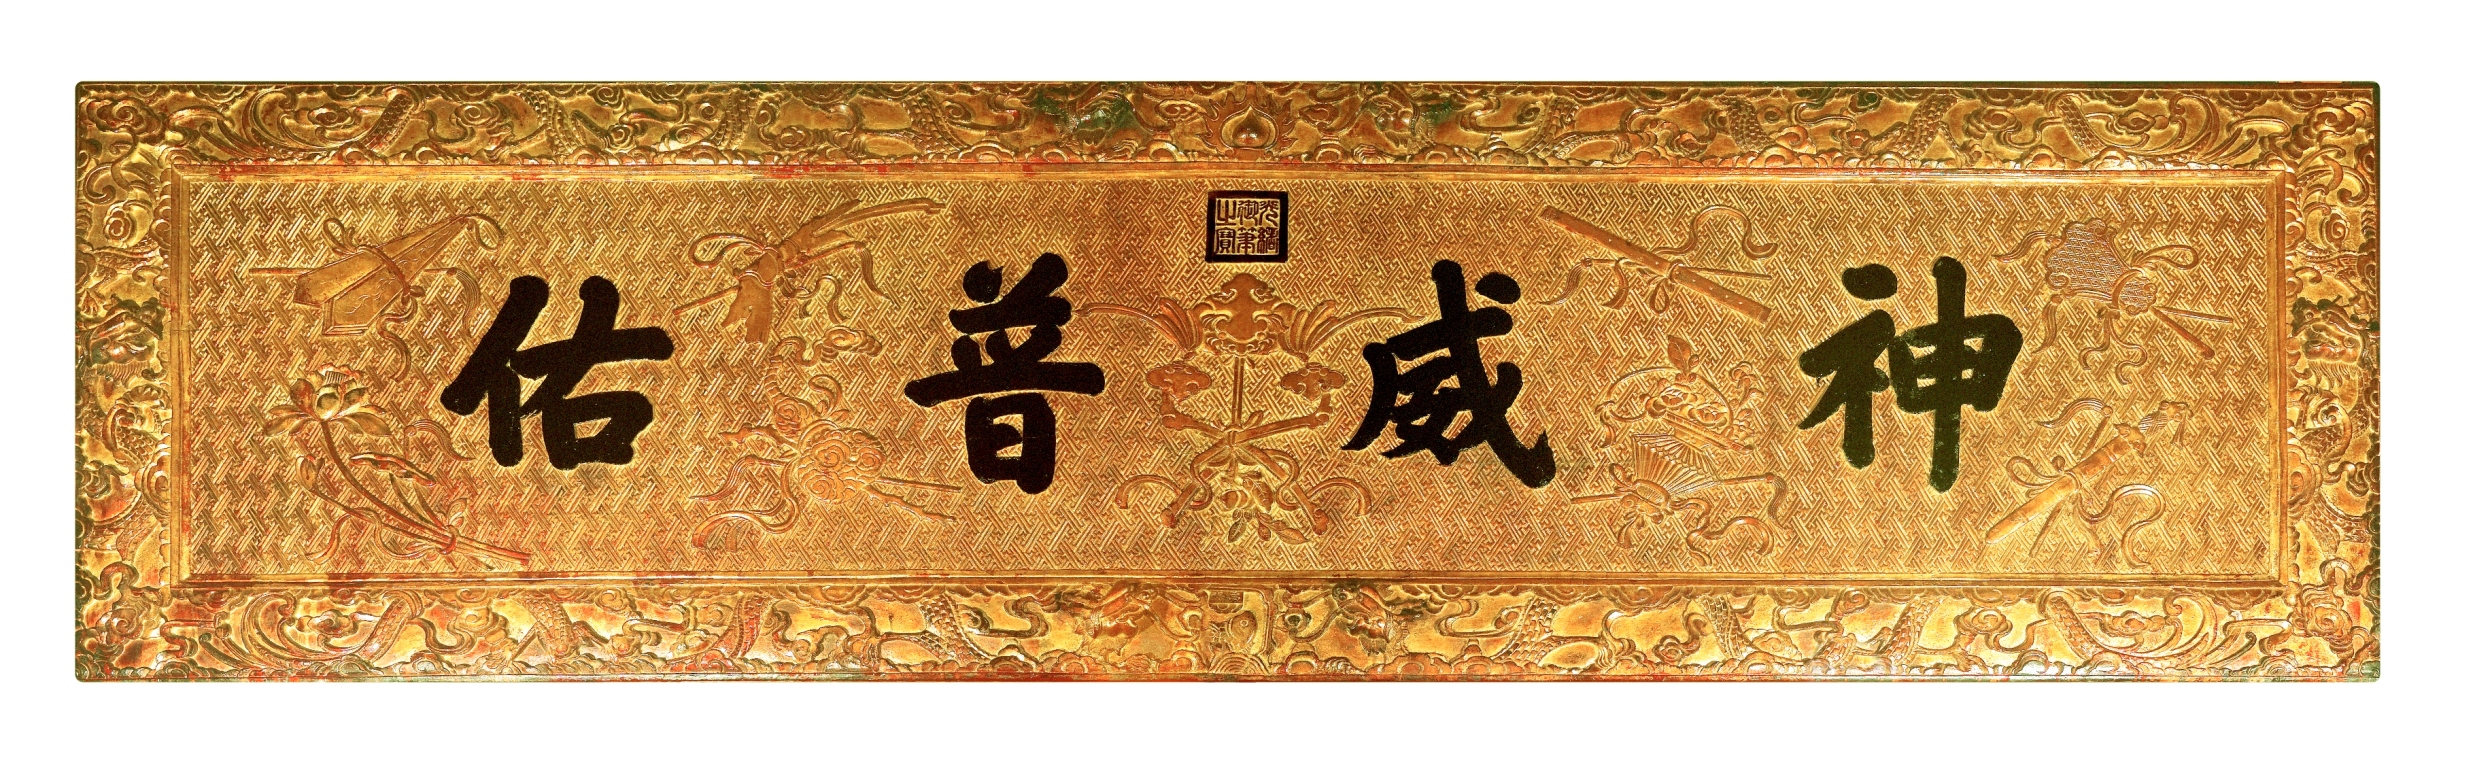 Plaque bearing the Inscription “Shen Wei Pu You” (literally means “God Protects All”). Courtesy of Tung Wah Group of Hospitals.